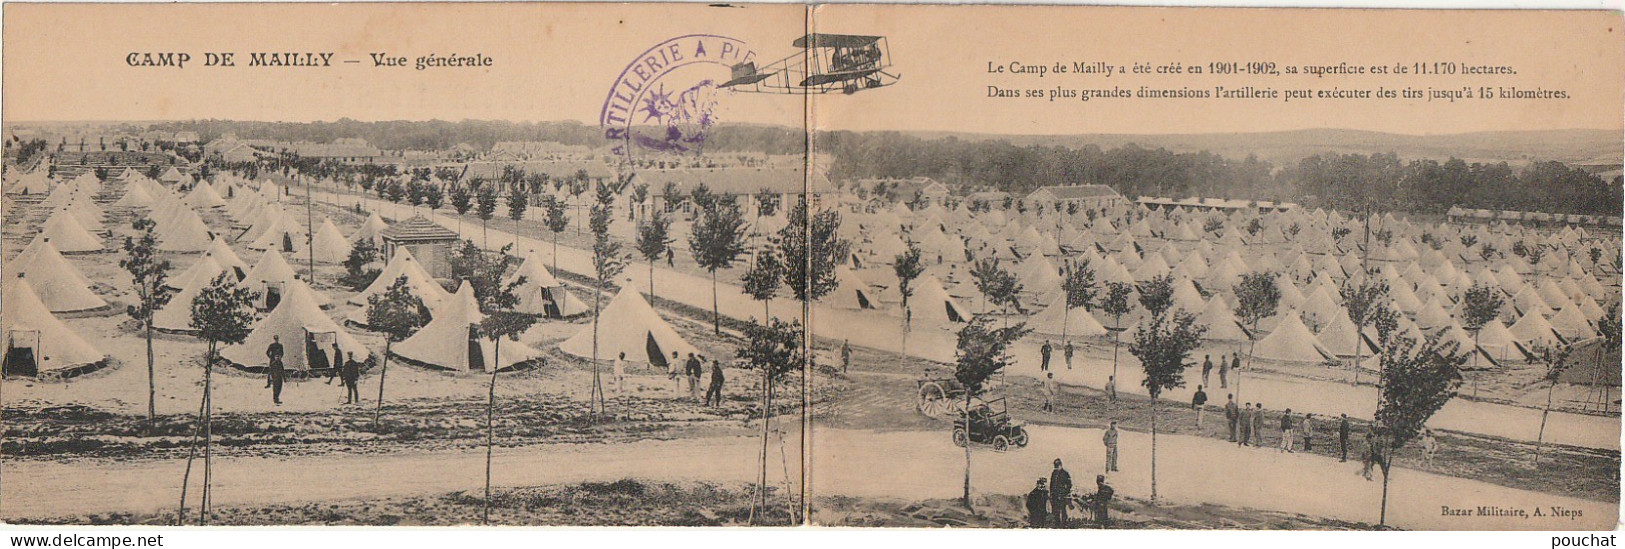 WA 21-(10) CAMP DE MAILLY - VUE GENERALE - AVION BIPLAN - TAMPON MILITAIRE - CARTE PANORAMIQUE - 2 SCANS - Mailly-le-Camp